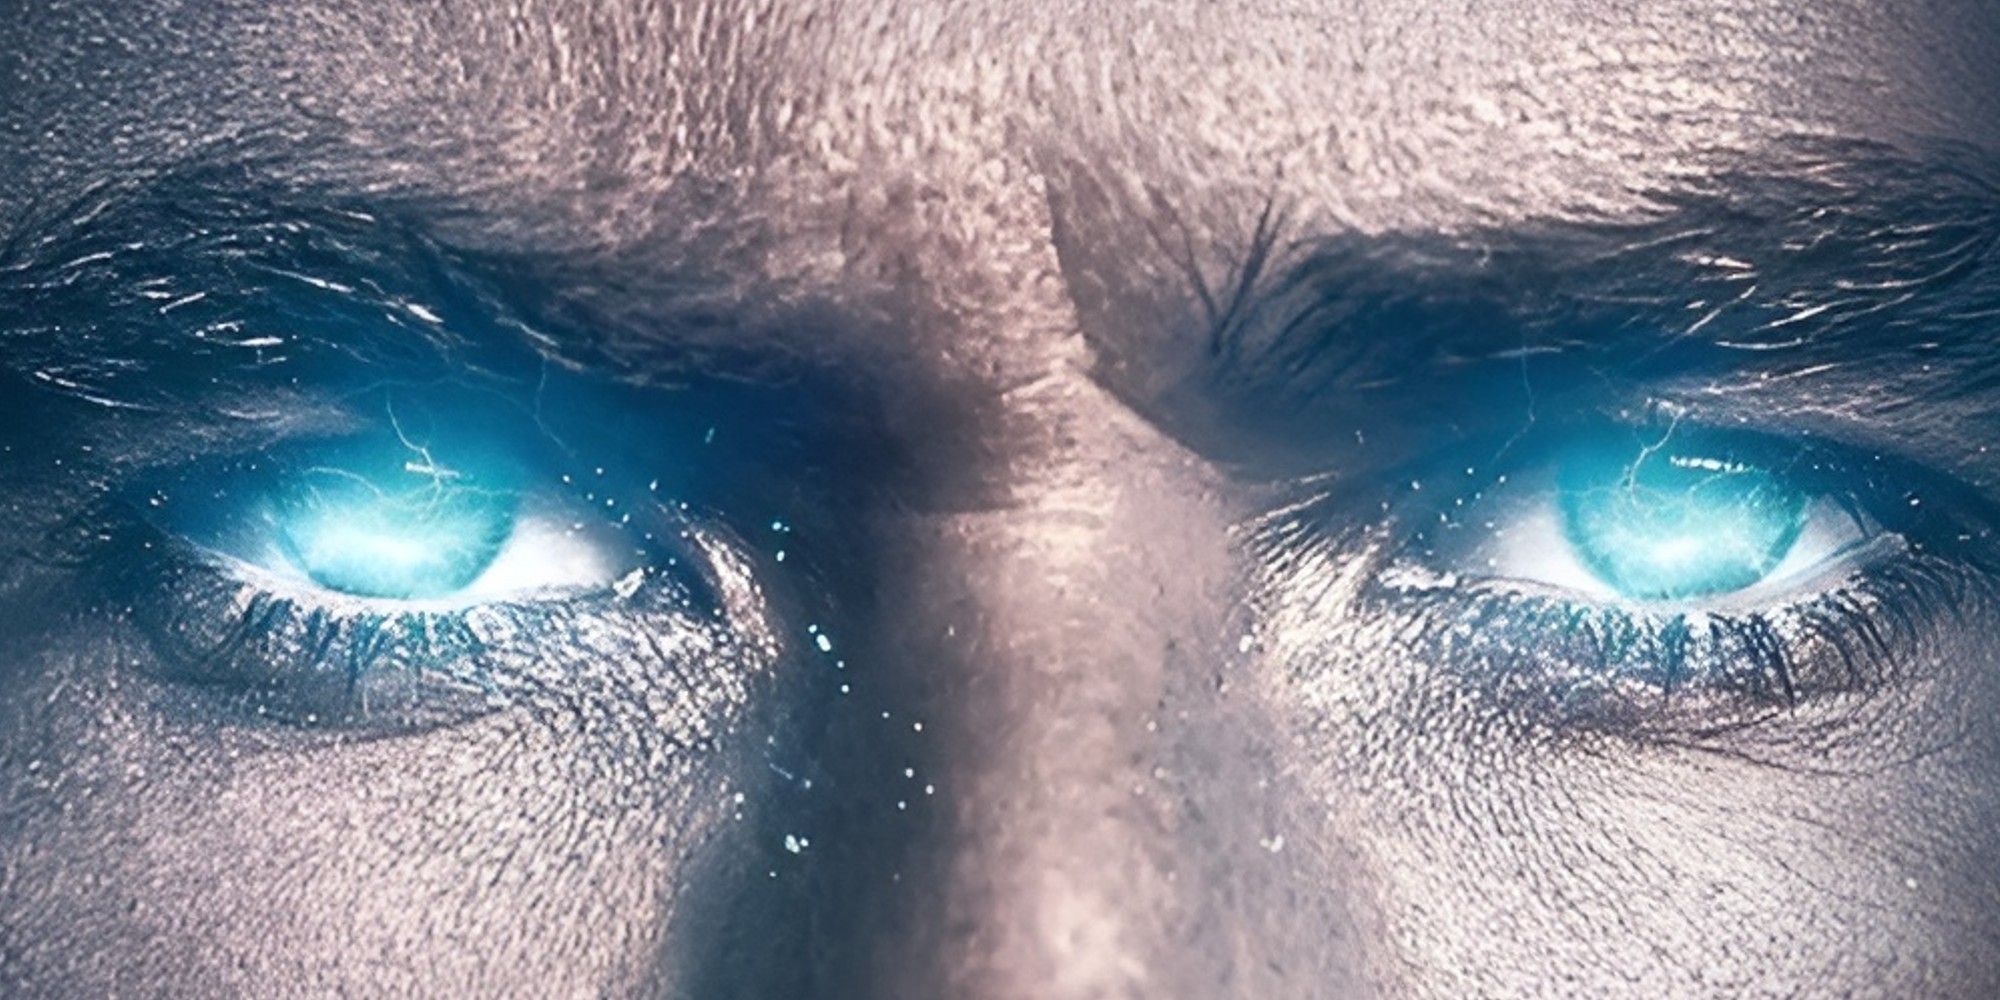 Thor 5 fan poster showing a close up shot of Thor's eyes with lightining.